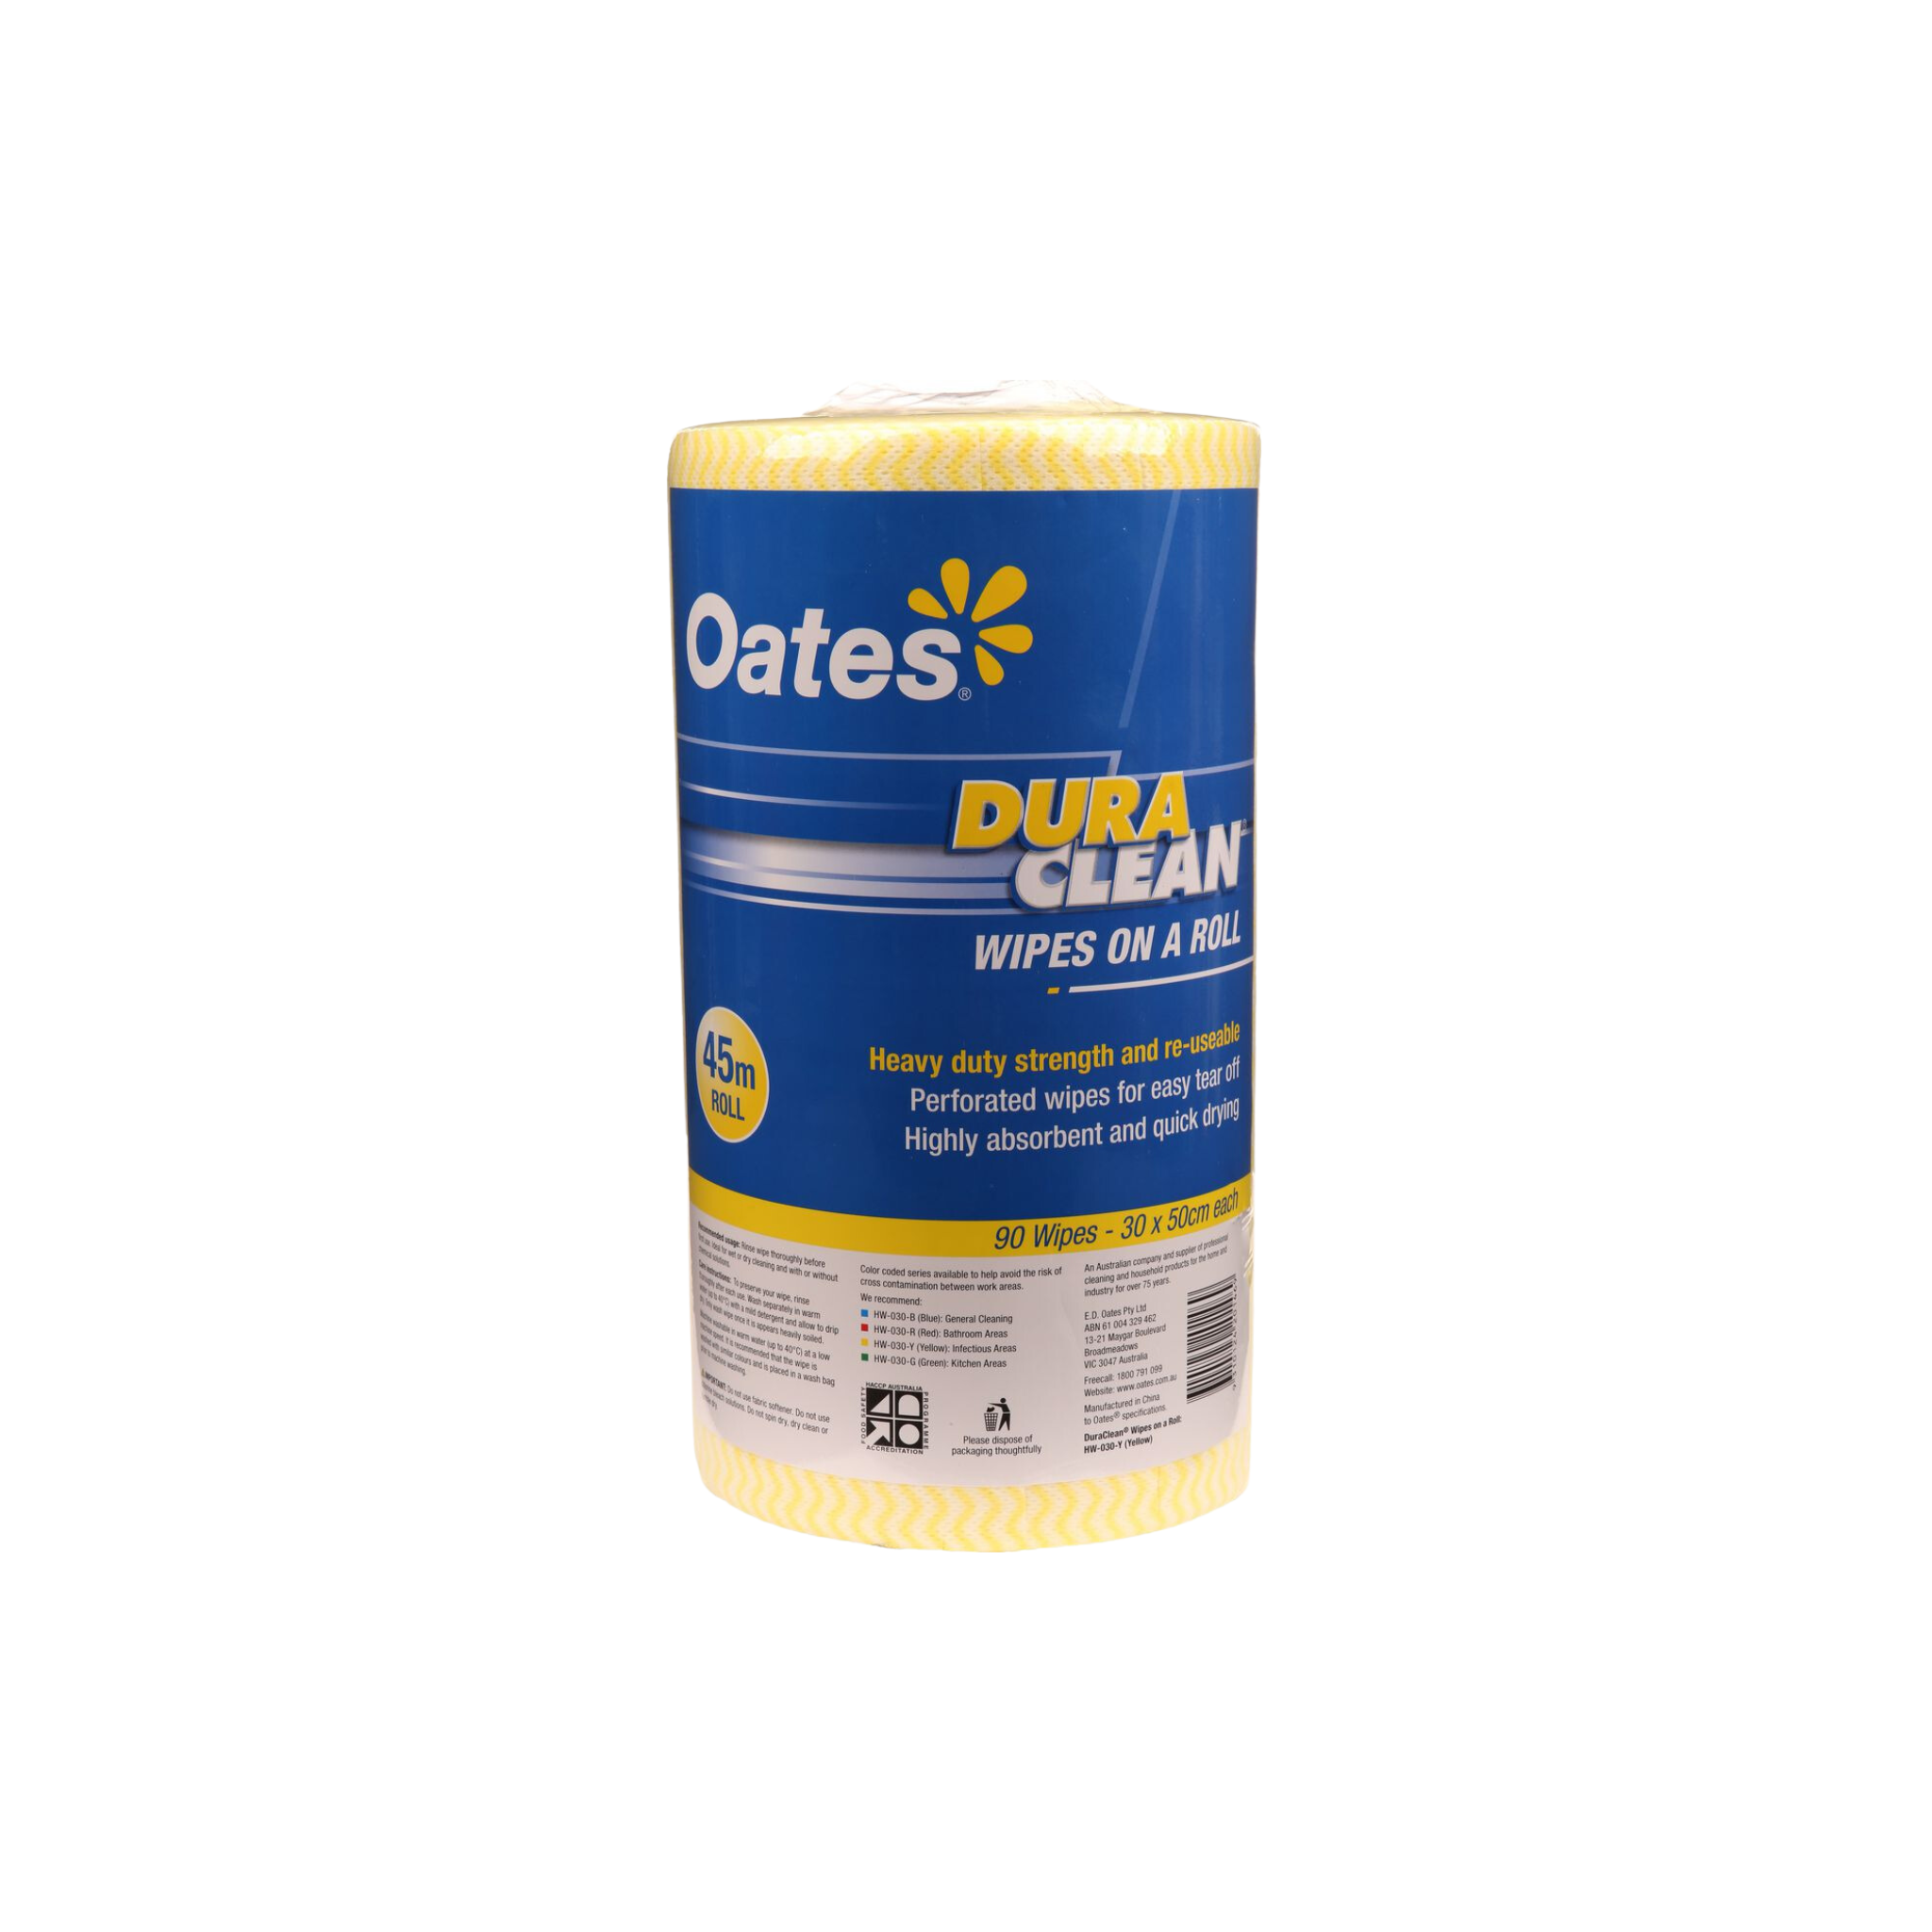 Oates DuraClean Roll 90 wipes - Yellow